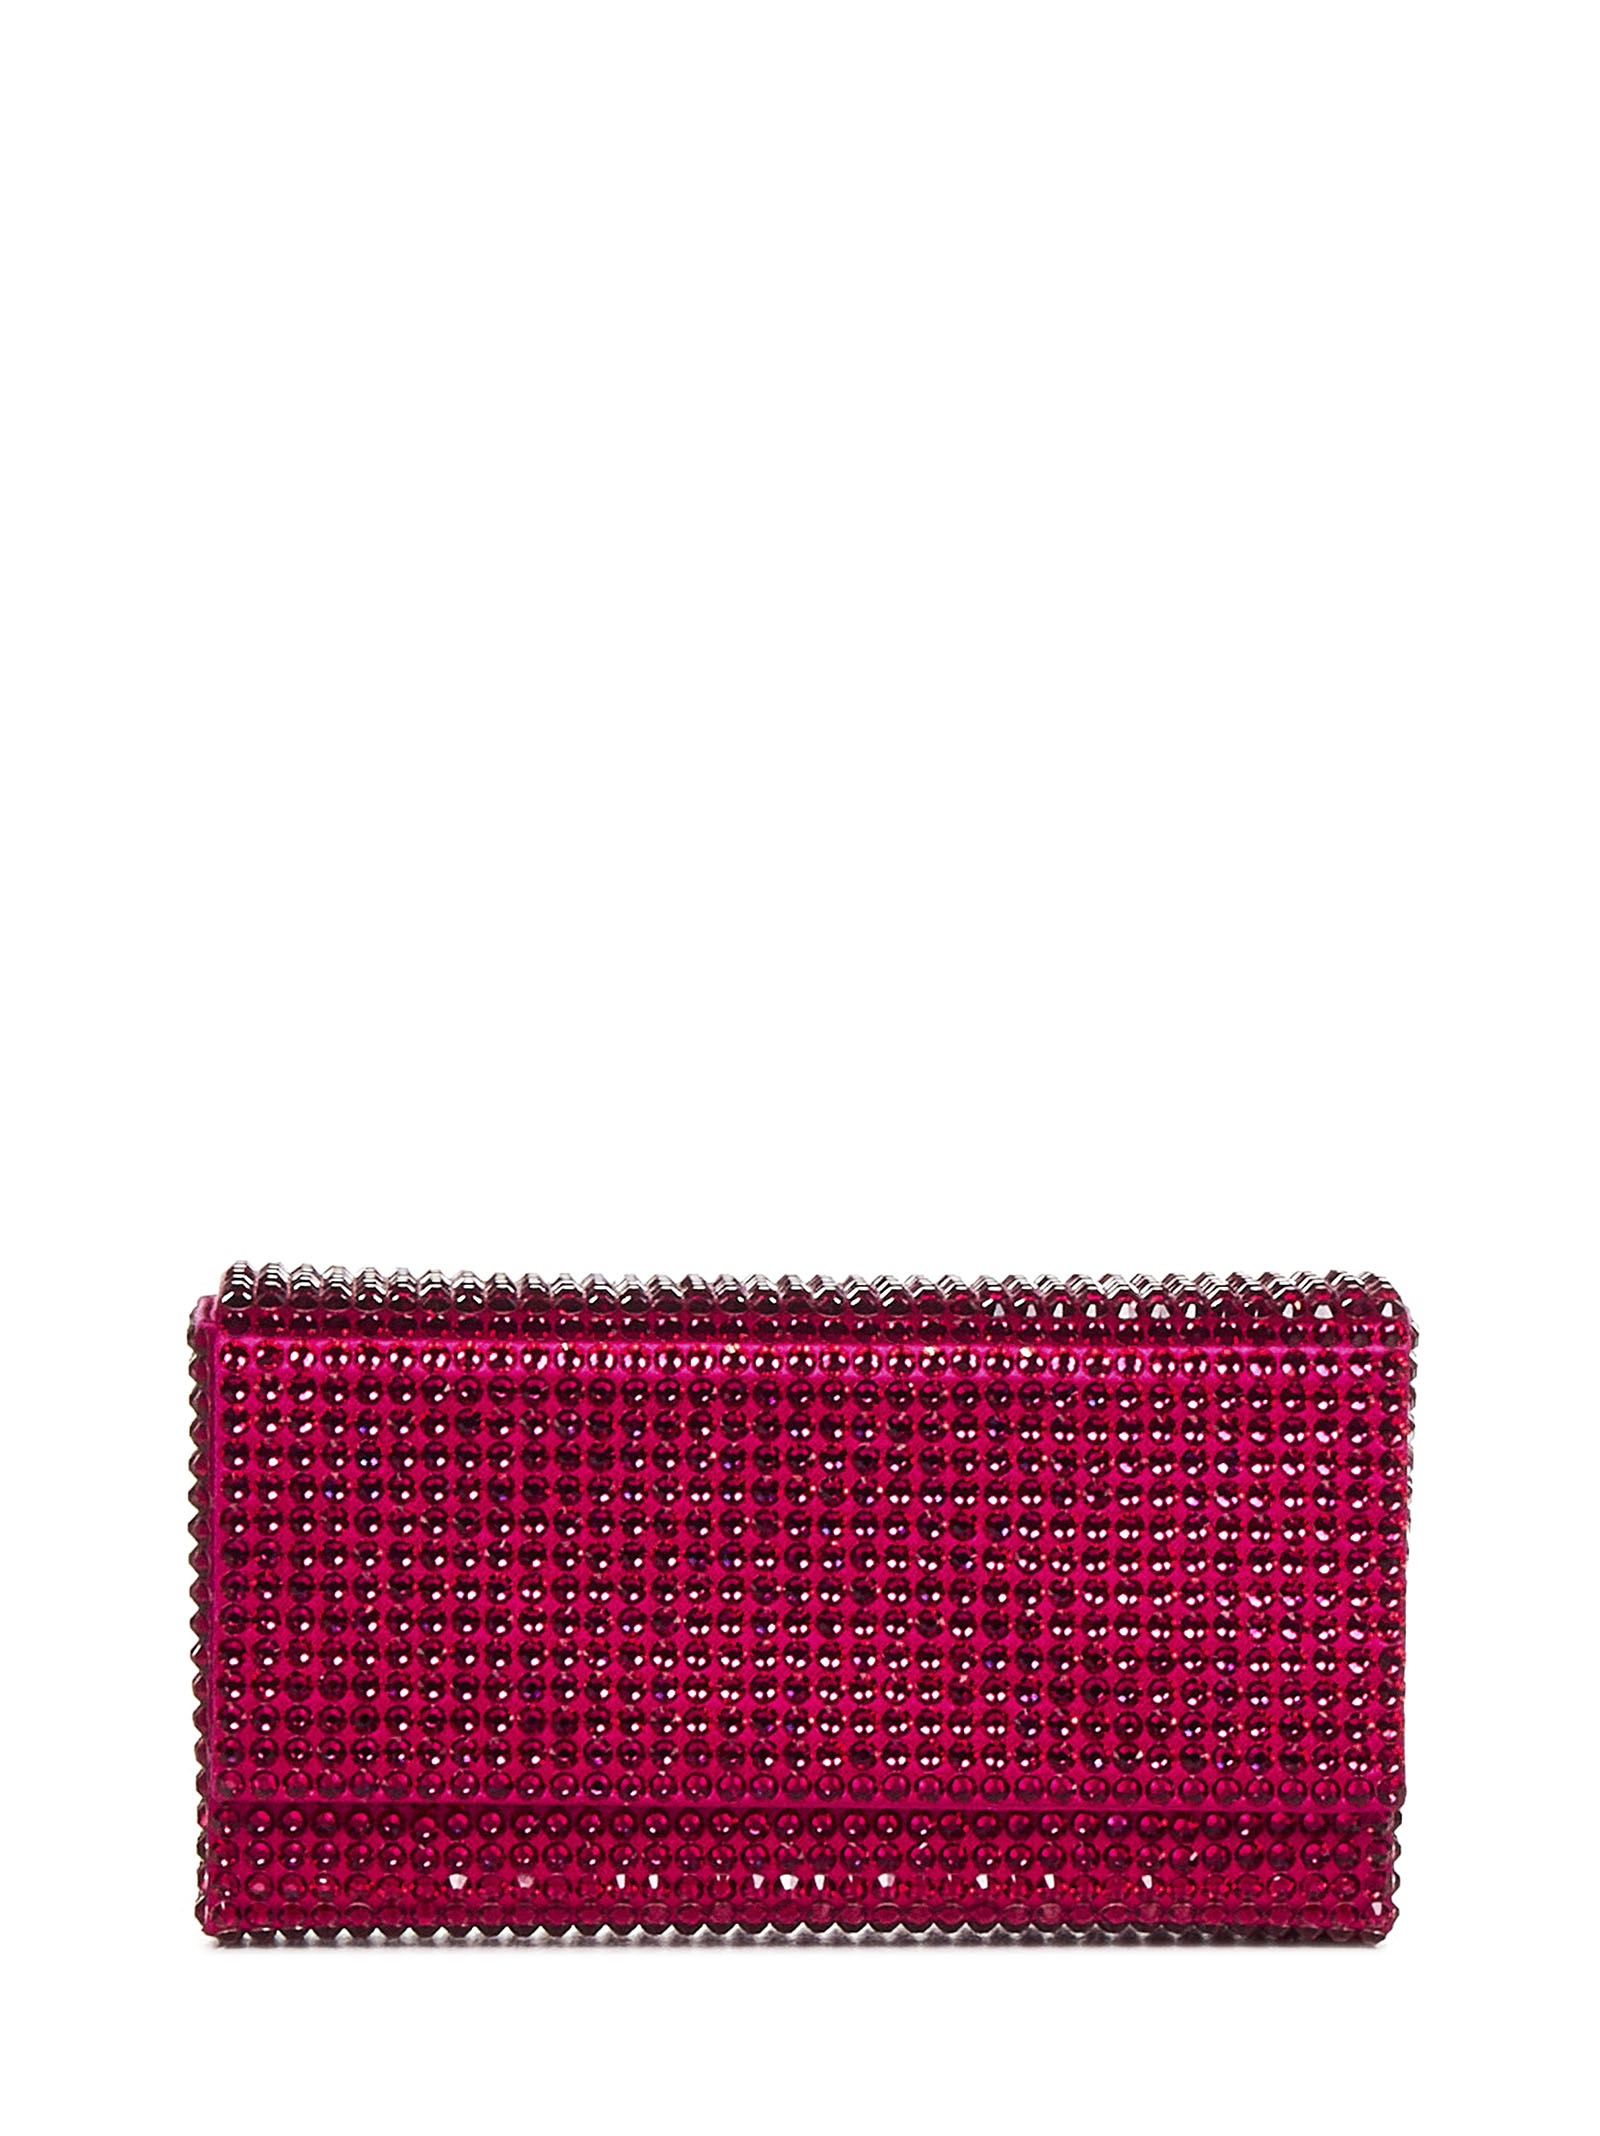 SUPER AMINI PALOMA ruby clutch in satin and crystals with chain shoulder strap. - 1